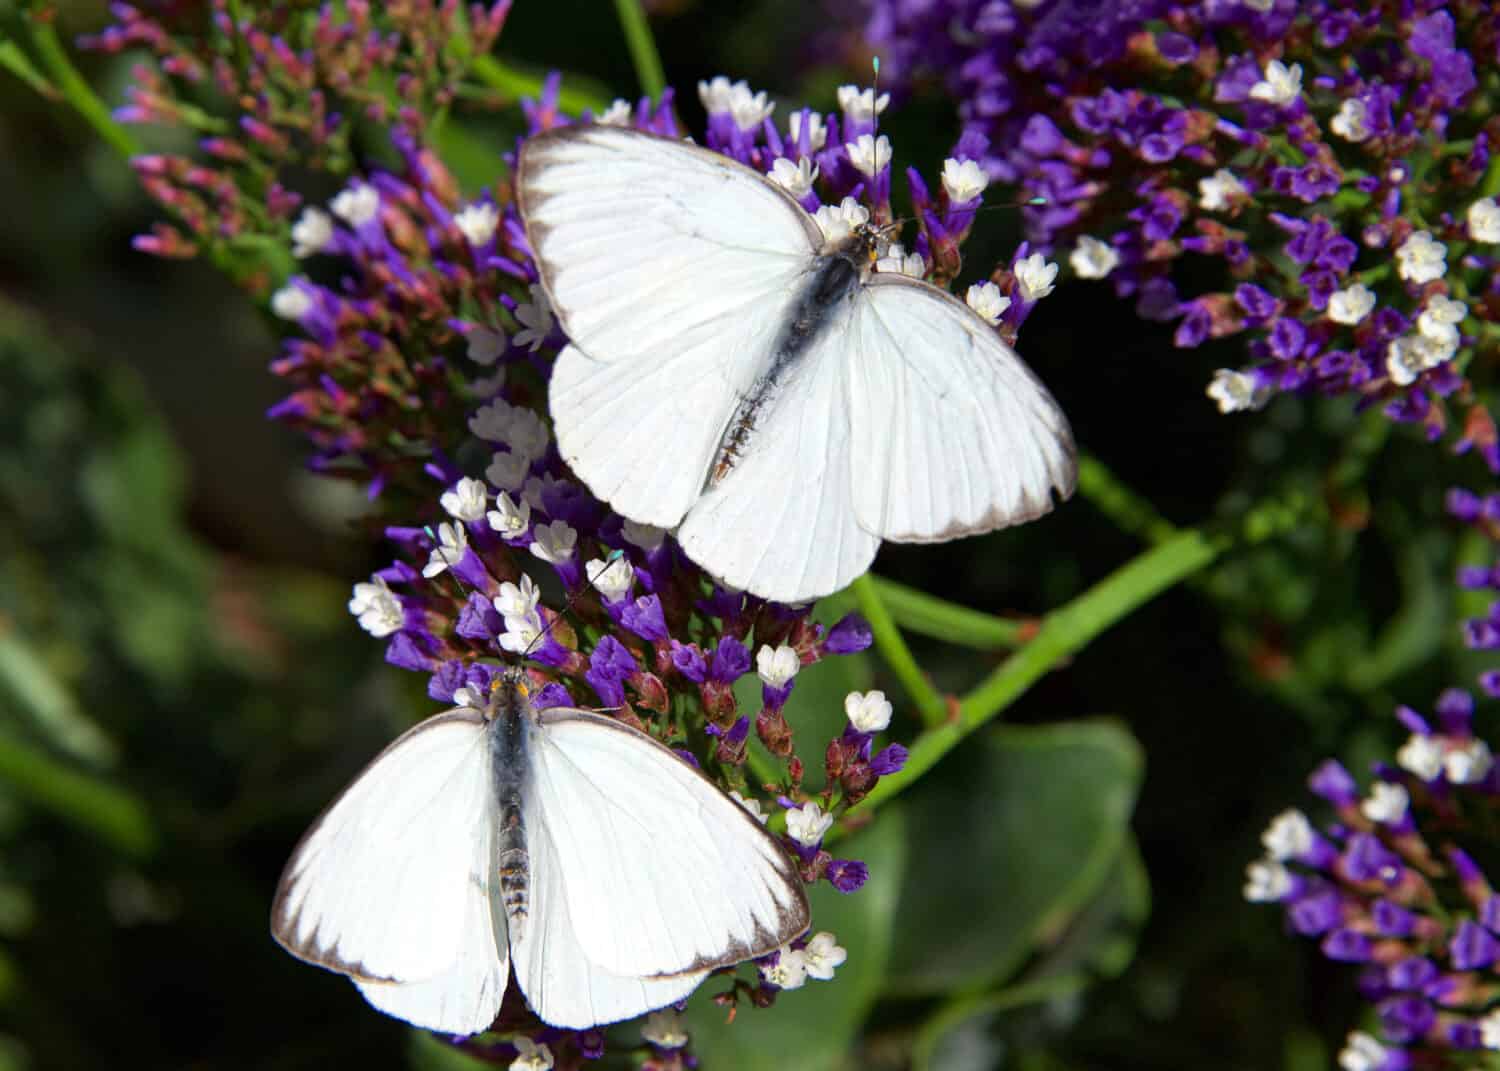 Two Great southern white butterflies on purple flowers, drinking nectar. Top view